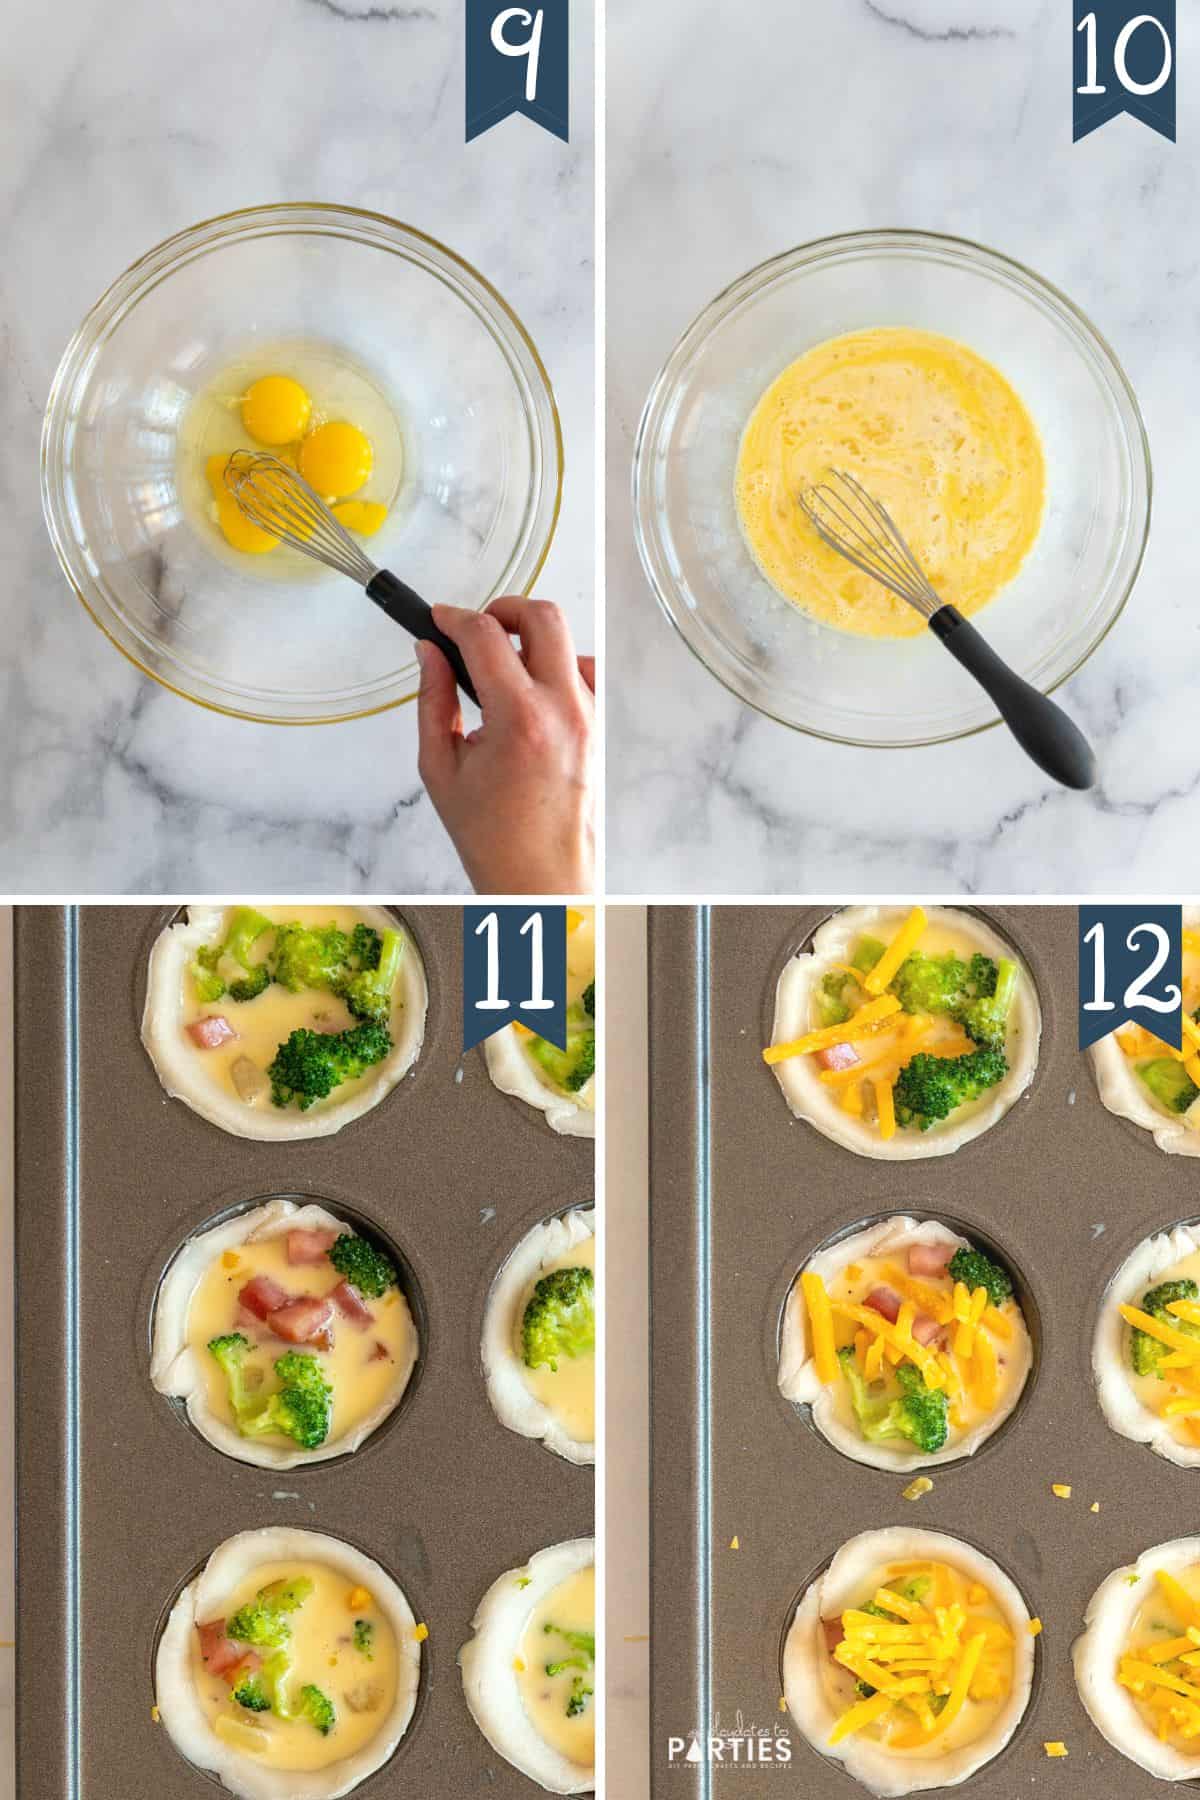 How to Make Ham and Broccoli Quiche Bites steps 9-12.